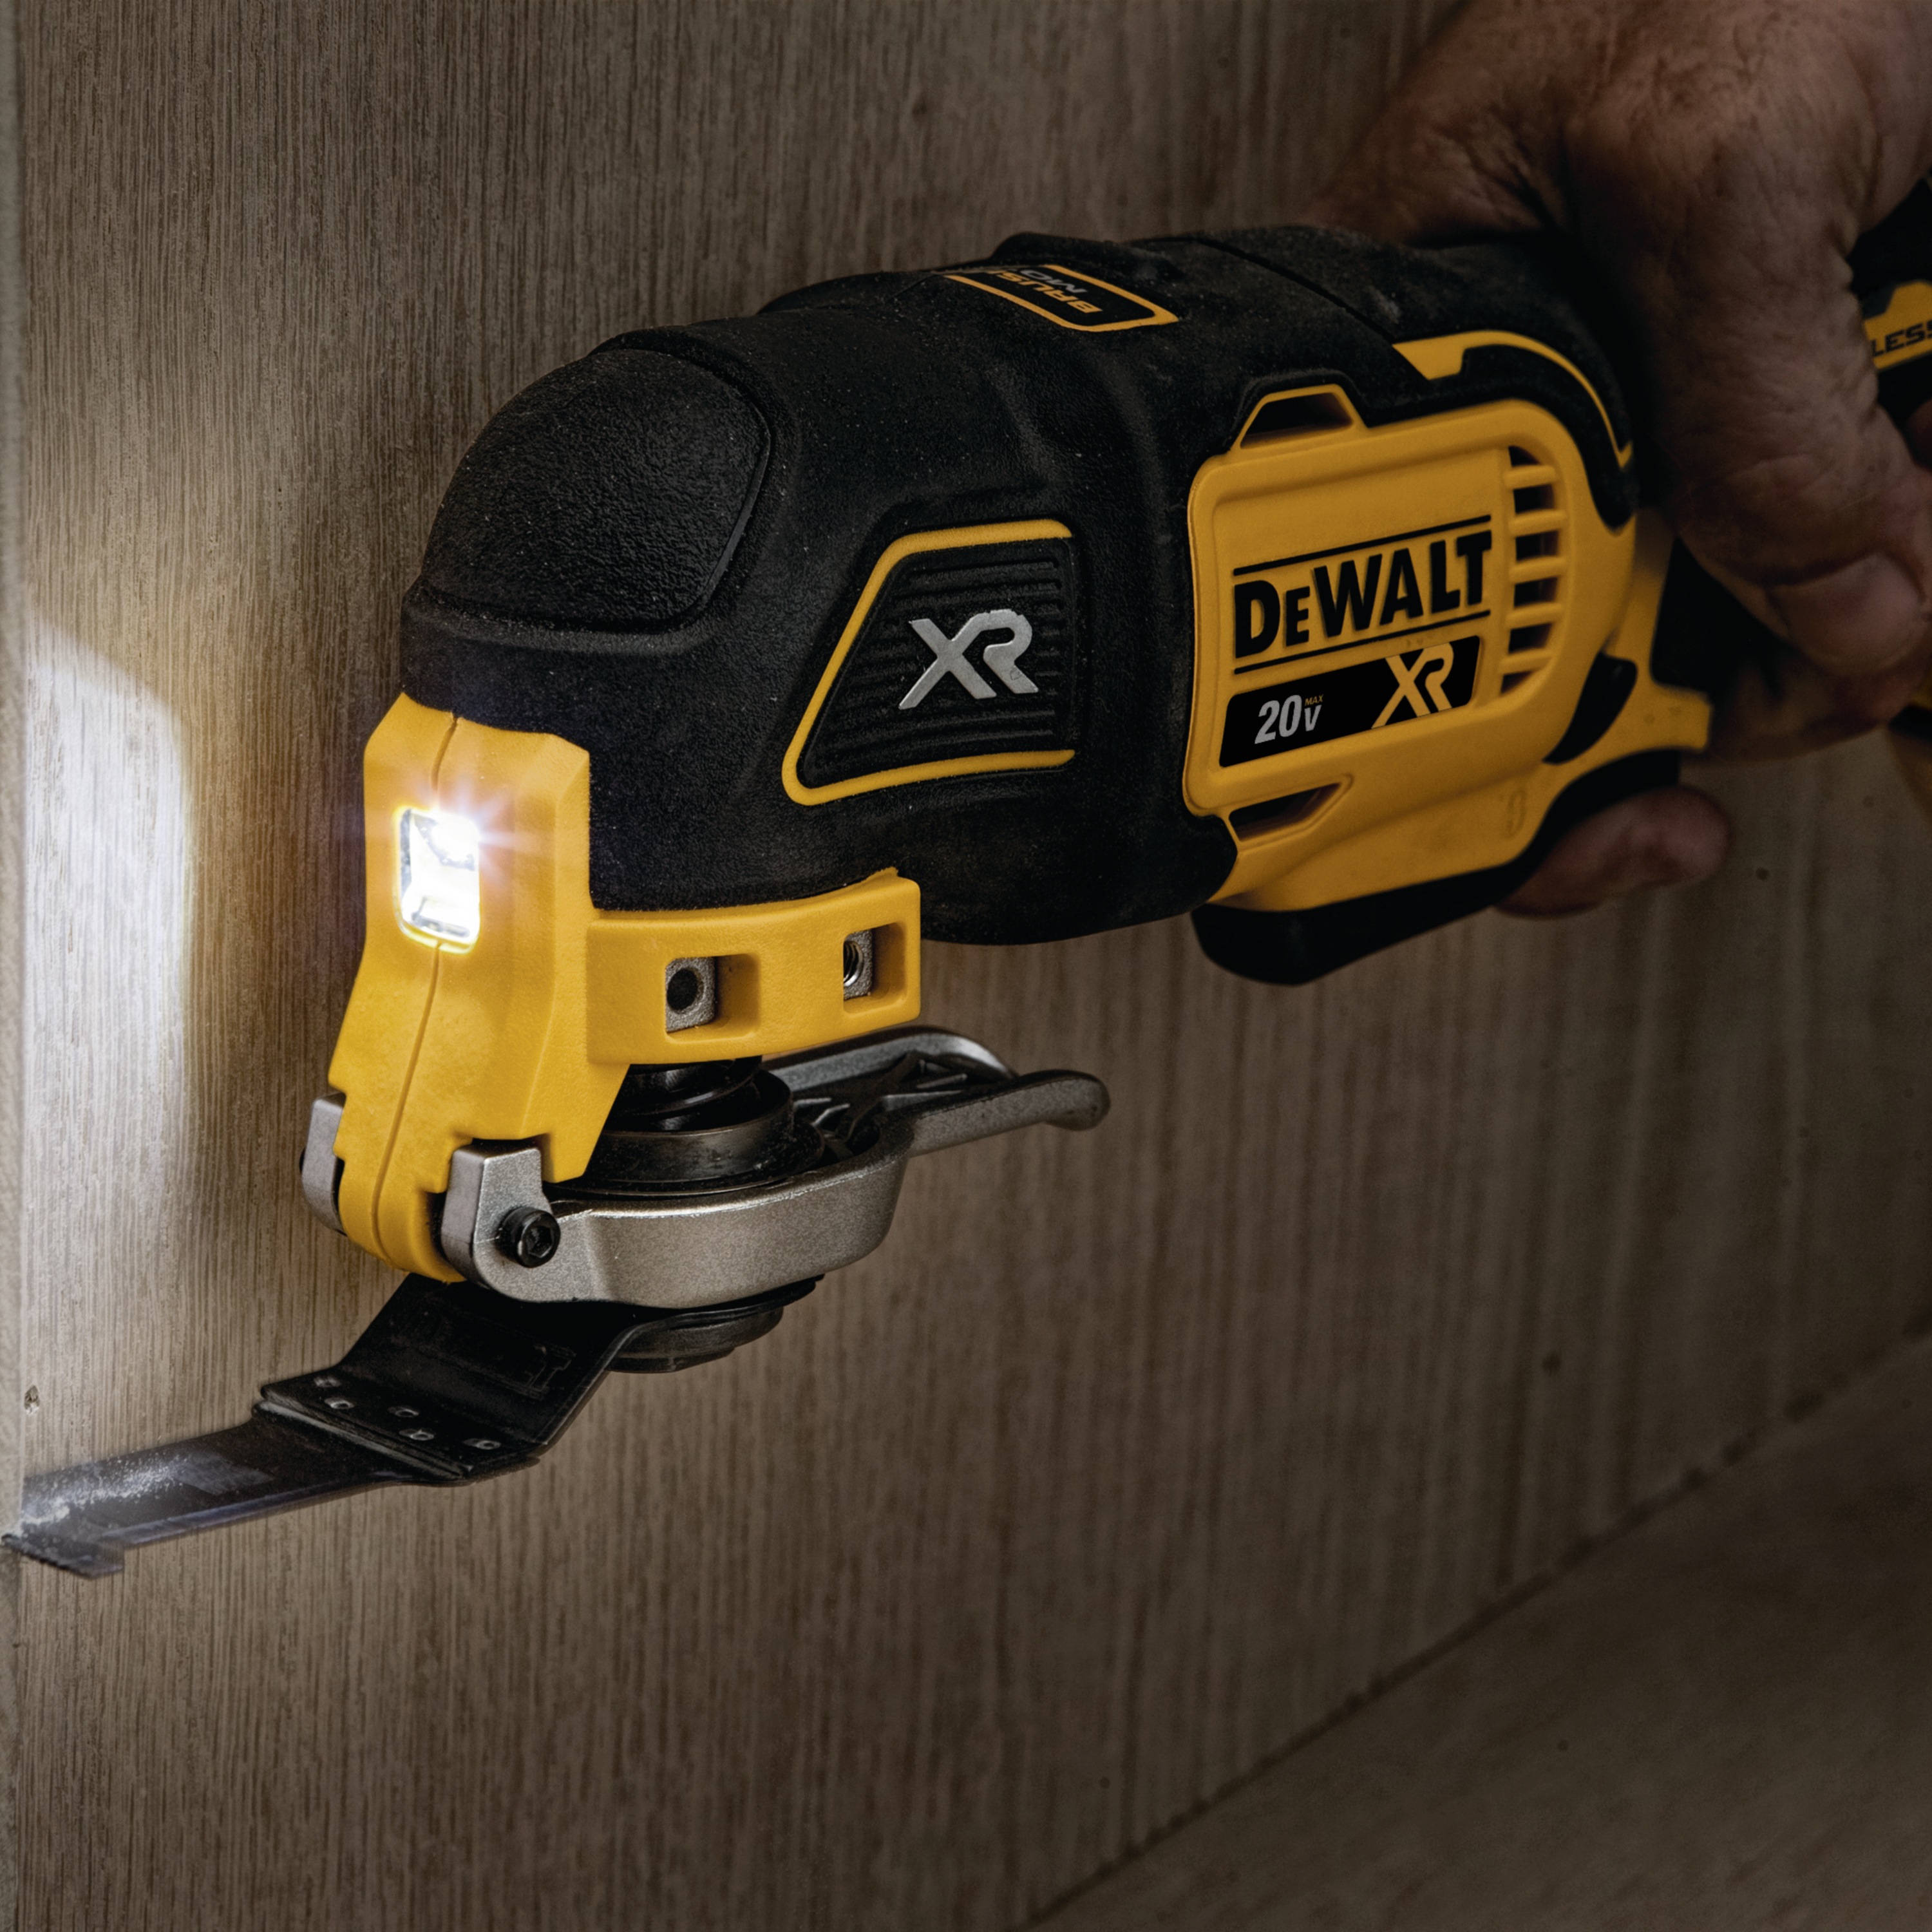 XR Cordless Oscillating Multi Tool being used by person to slice through a wooden surface